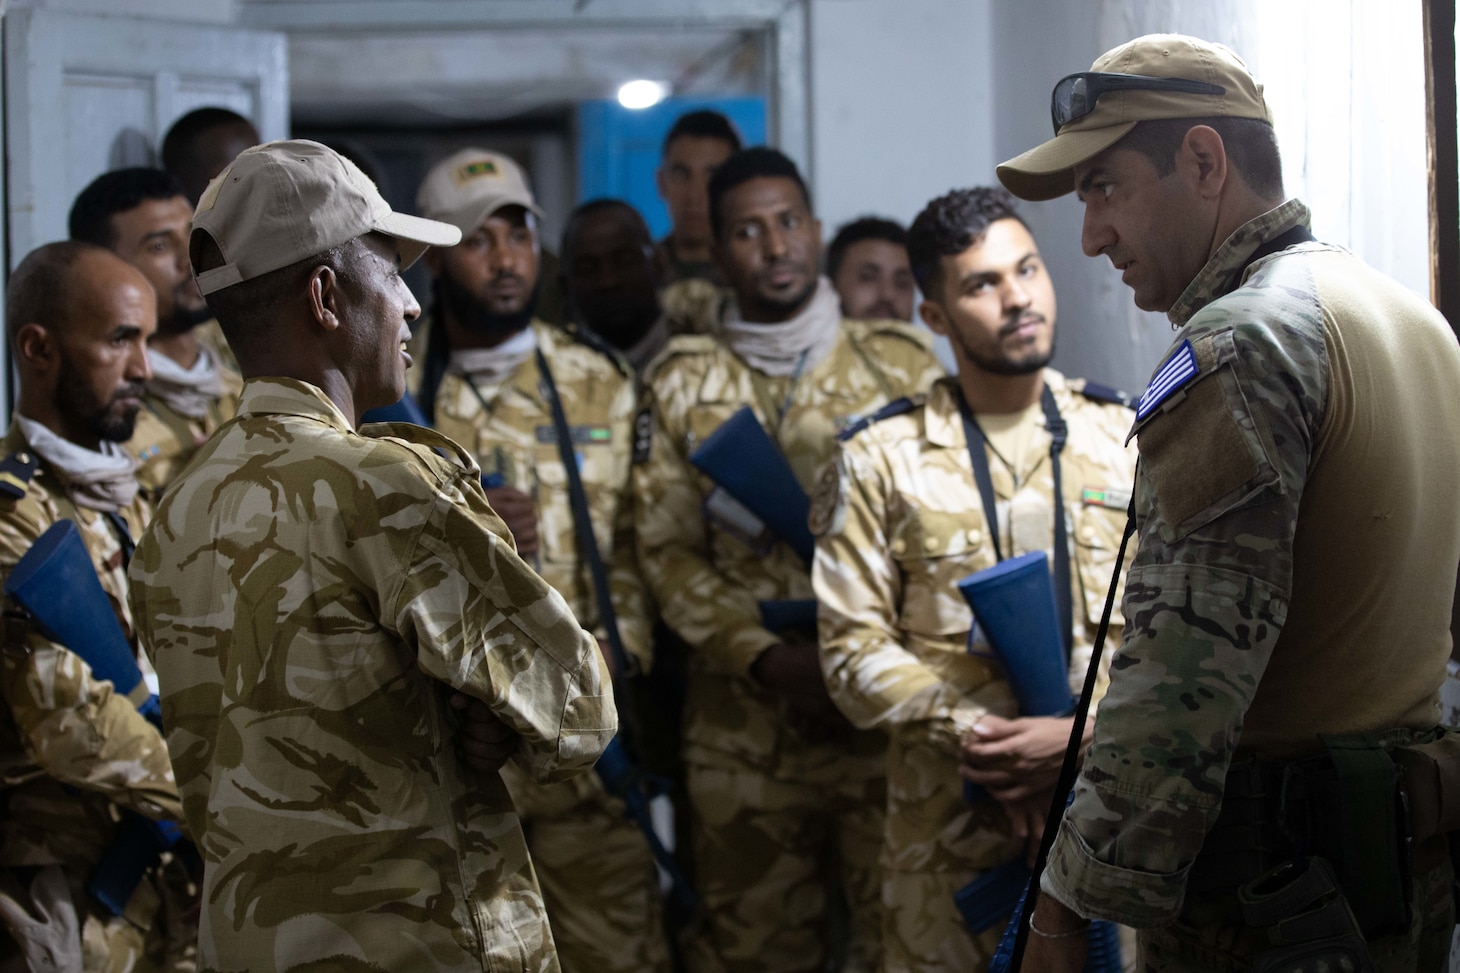 BIZERTE, Tunisia (May 24, 2022) NATO Maritime Interdiction Training Center cross-train tactical sweep maneuvers with the Mauritanian Boarding Team during exercise Phoenix Express 2022 in Bizerte, Tunisia, on May 24, 2022. Phoenix Express 22, conducted by U.S. Naval Forces Africa, is a maritime exercise designed to improve cooperation among participating nations in order to increase maritime safety and security in the Mediterranean. (U.S. Navy Photo by Mass Communication Specialist Petty Officer 2nd Class Timothy Haggerty/Released)